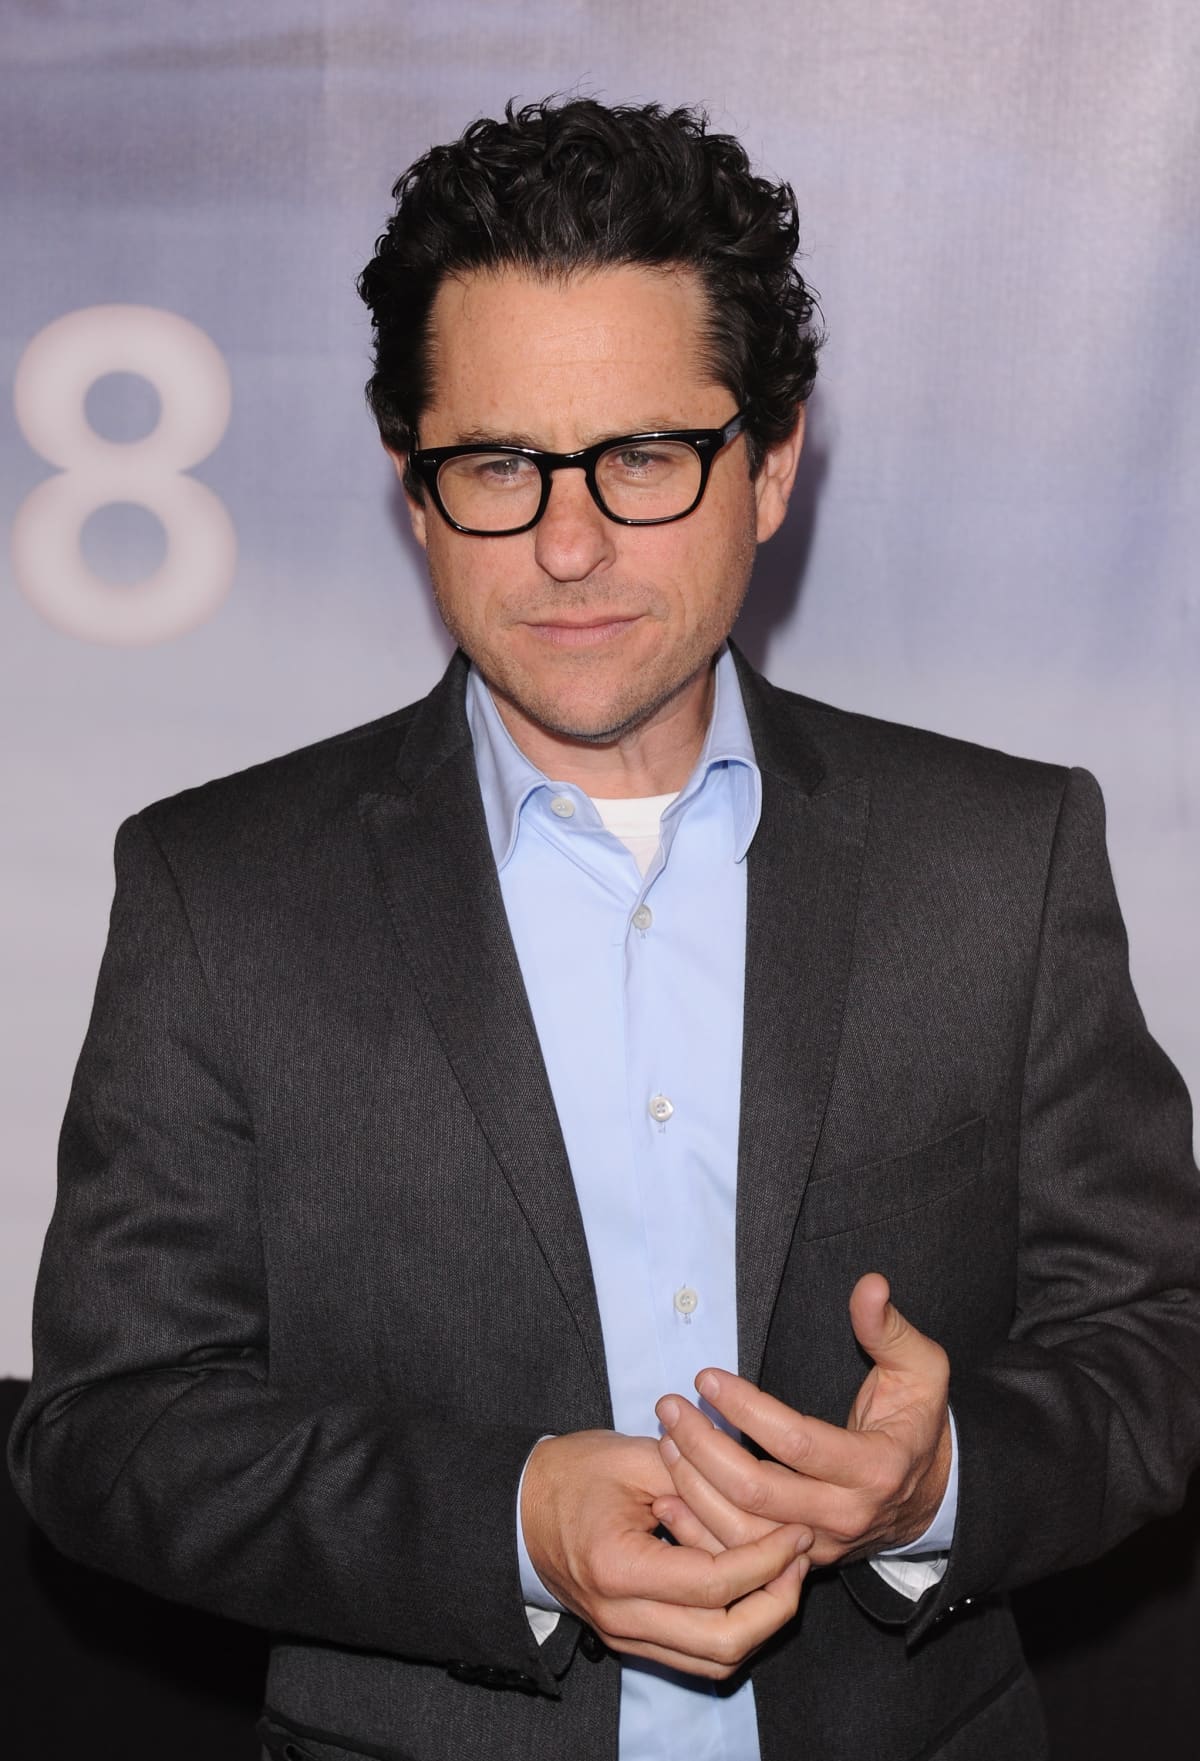 BEVERLY HILLS, CA - NOVEMBER 22: J.J. Abrams arrives to Paramount Pictures' 'Super 8' Blu-ray and DVD release party at AMPAS Samuel Goldwyn Theater on November 22, 2011 in Beverly Hills, California. (Photo by JB Lacroix/WireImage)